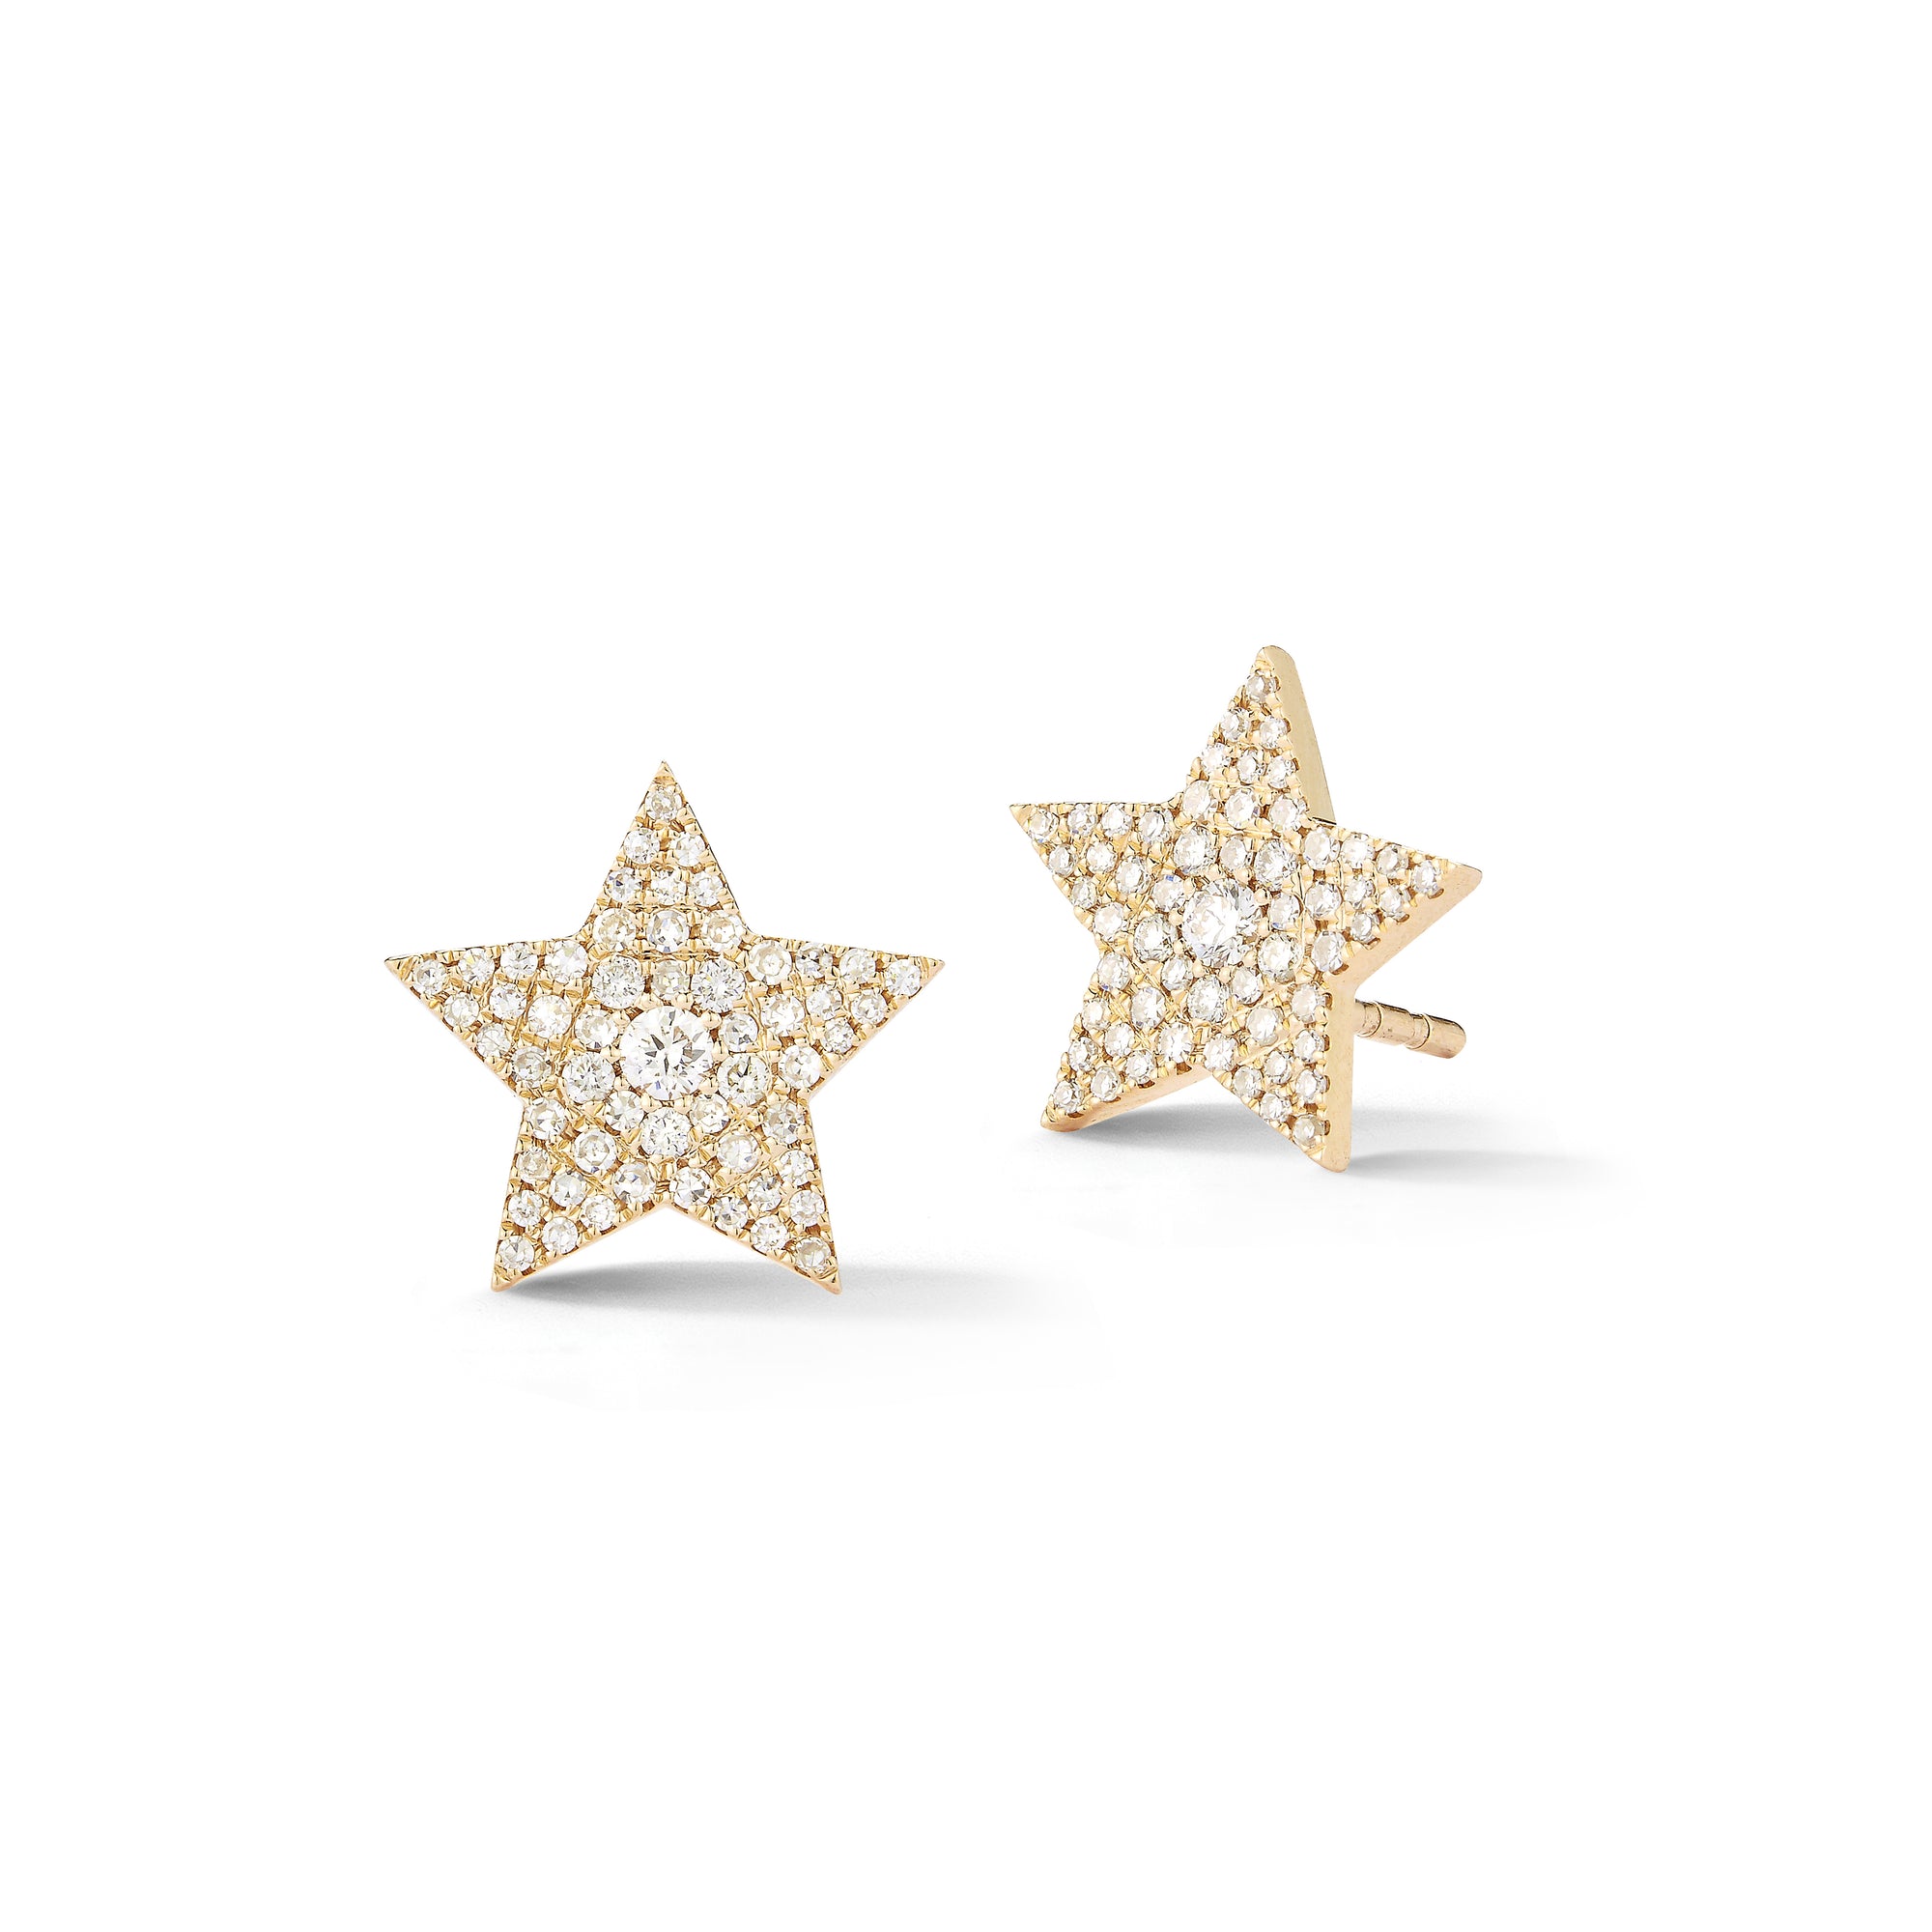 Star Stud Earrings -14k yellow Gold weighing 2.09 grams -112 round pave set diamonds 0.32 carats.